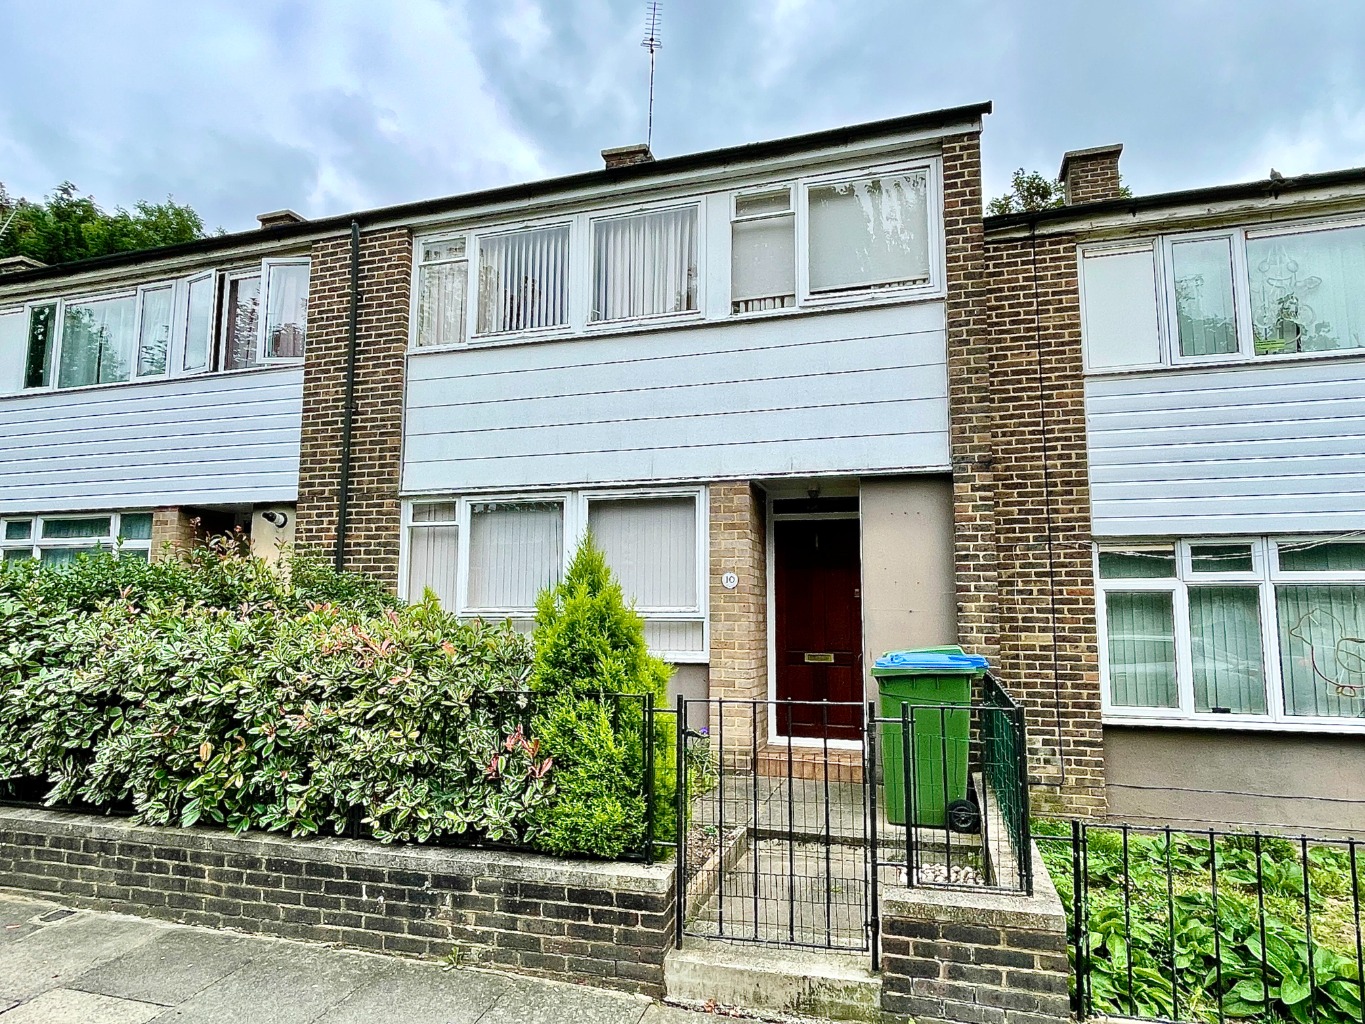 Beaumont Gibbs are offering for sale with immediate vacant possession, this three bedroomed mid terrace house for sale.